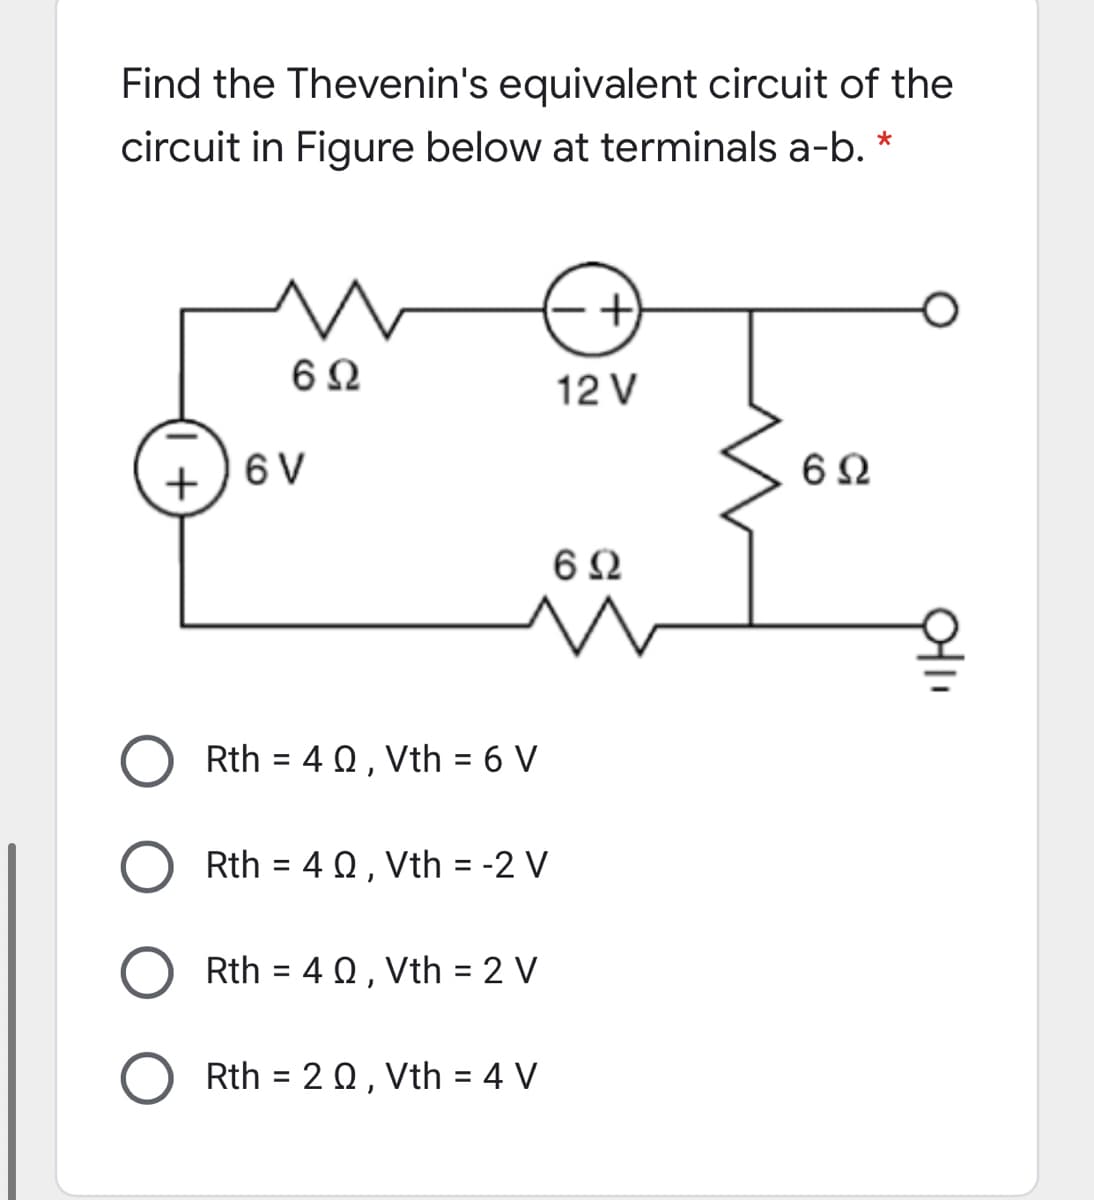 Find the Thevenin's equivalent circuit of the
circuit in Figure below at terminals a-b.
12 V
+) 6 V
Rth = 4 Q, Vth = 6 V
%3D
Rth = 4 Q, Vth = -2 V
%3D
Rth = 4 0, Vth = 2 V
Rth = 20, Vth = 4 V
%3D
%D
